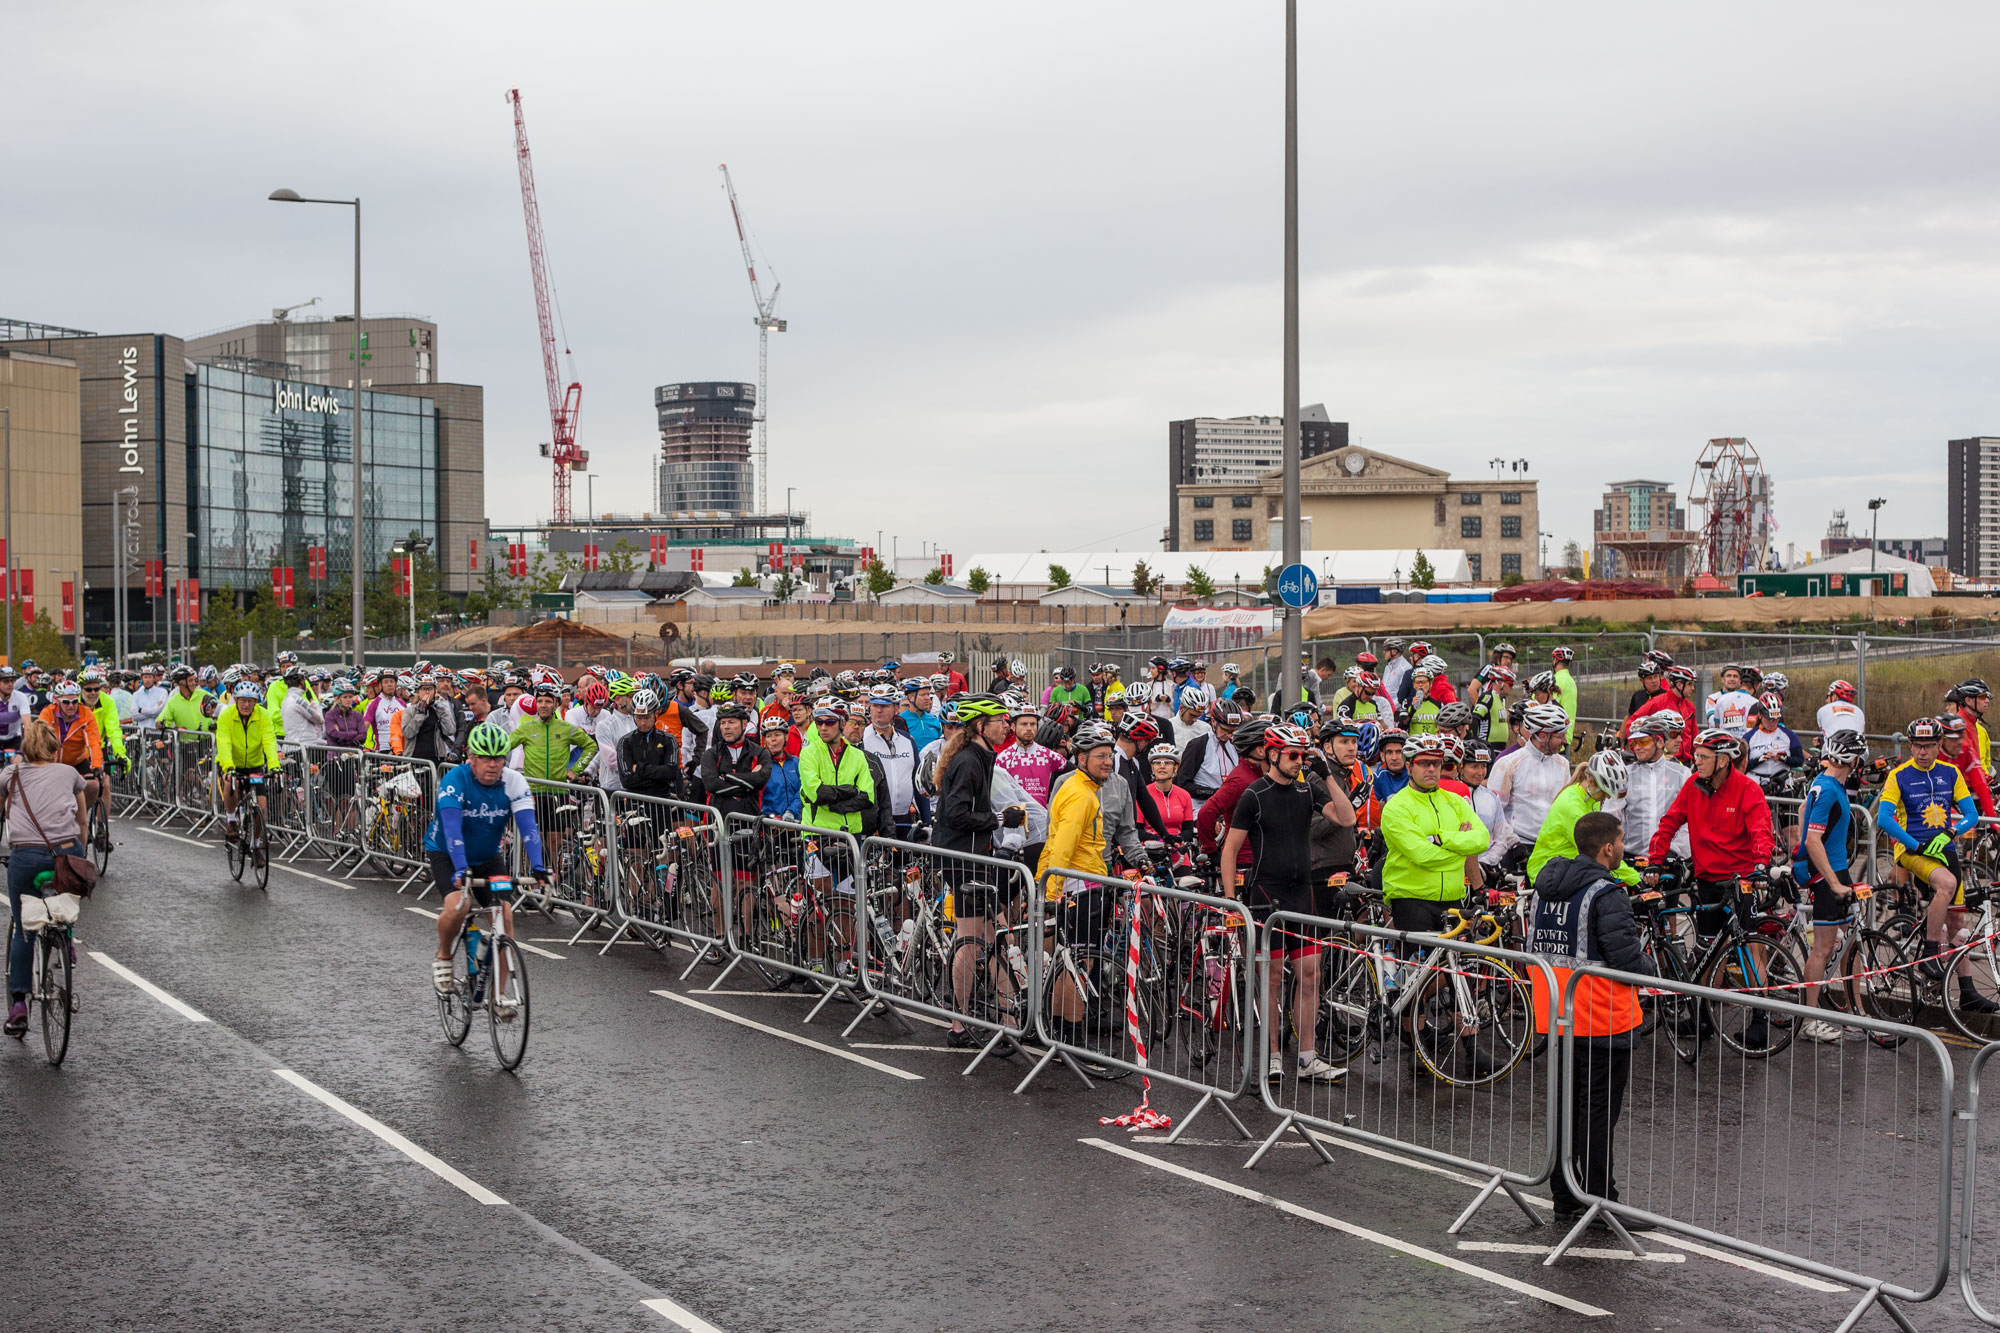 Cyclists queuing up for the start of RideLondon 2014